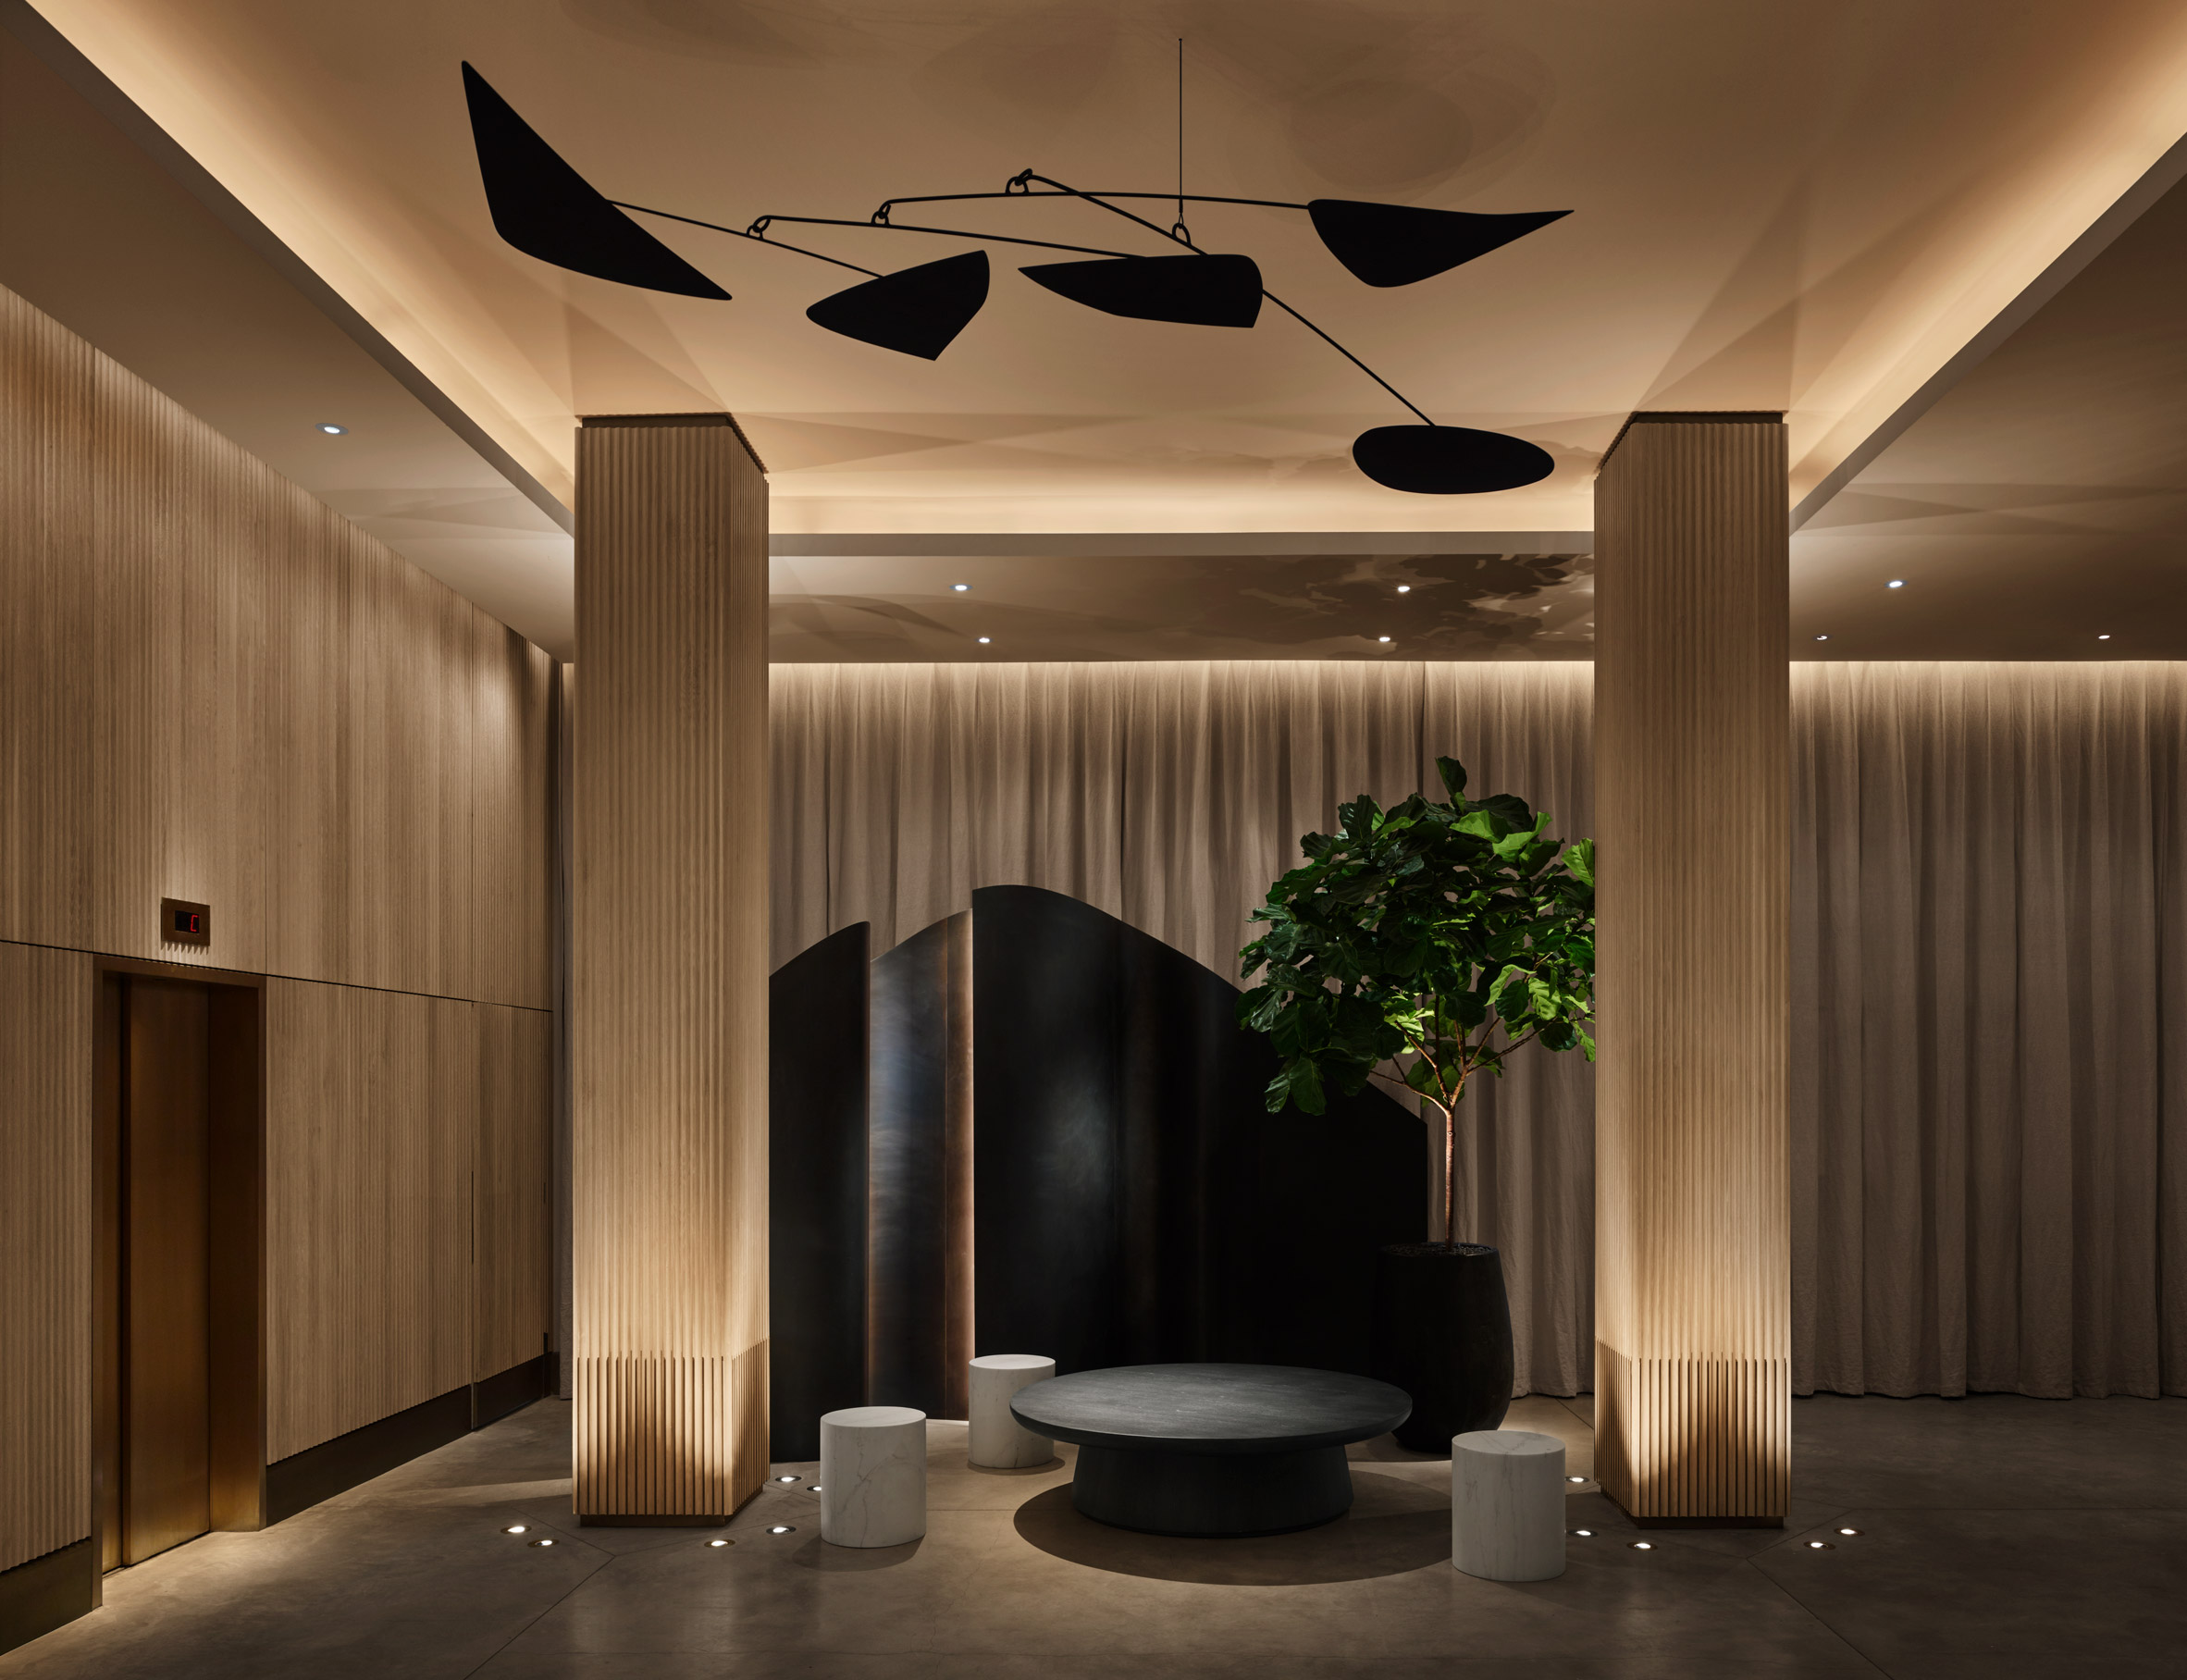 Anda Andrei's AHEAD nominated design for the 11 Howard Hotel in New York